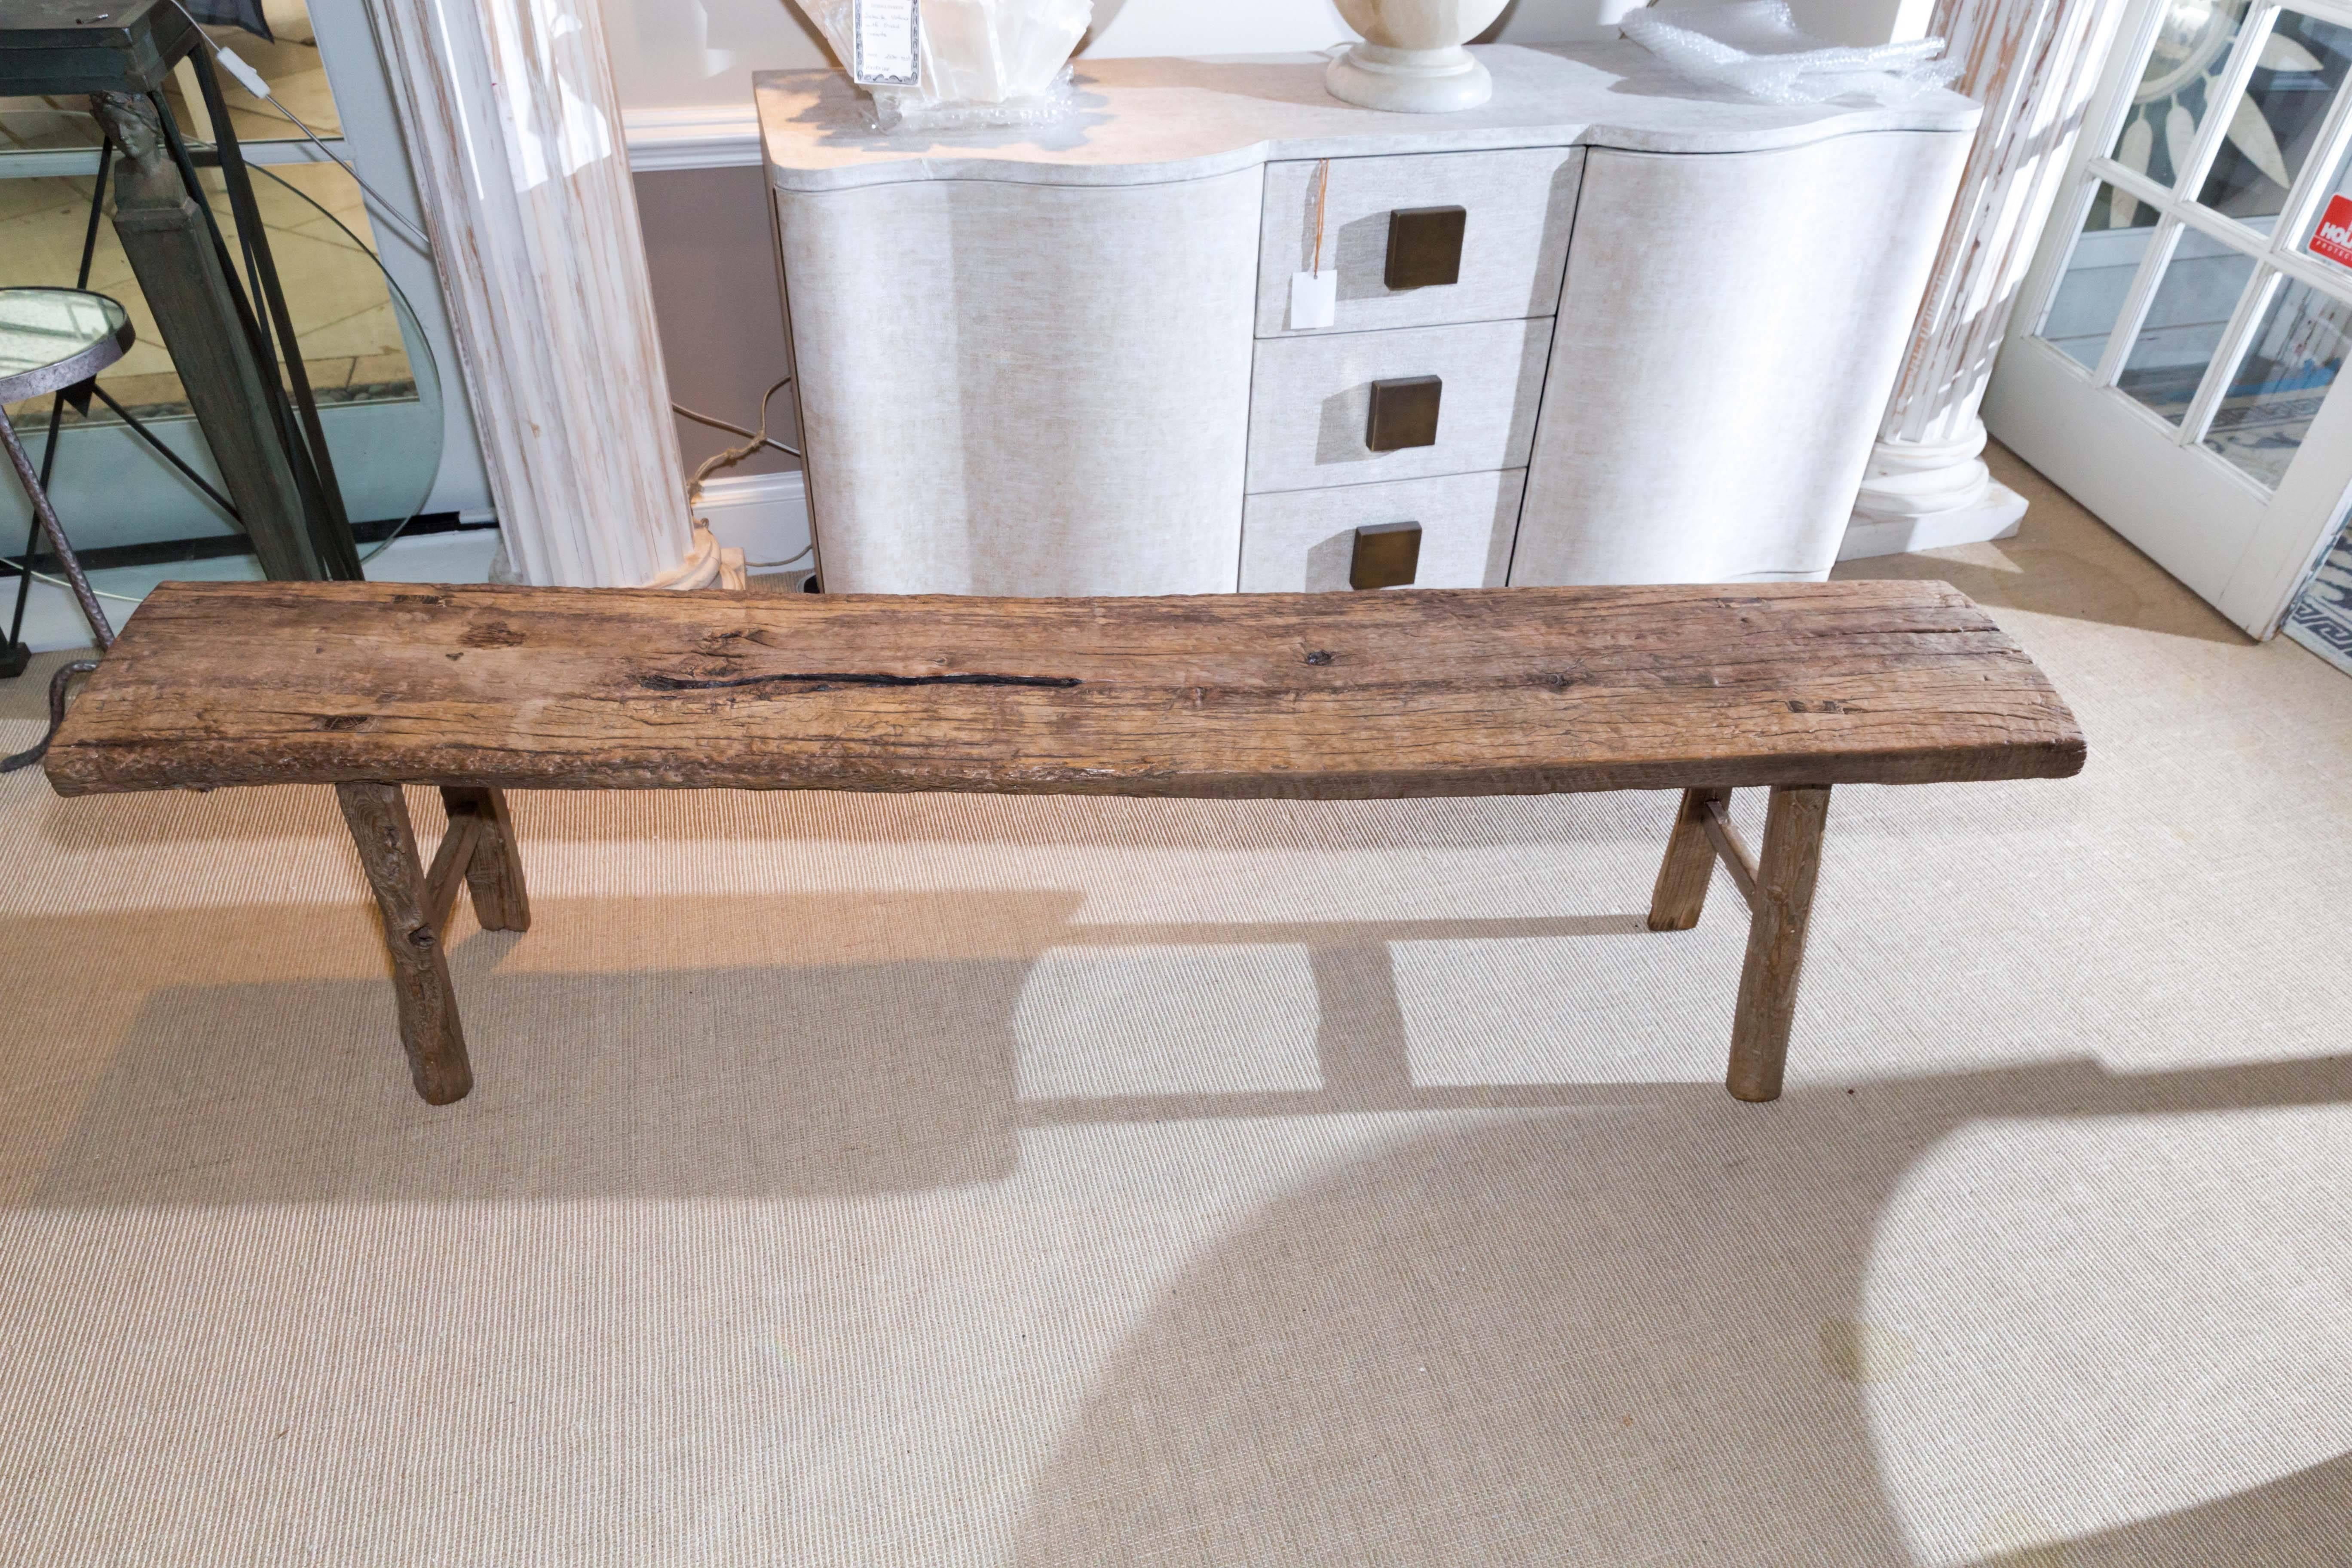 Attractive well made and sturdy bench made with antique walnut.